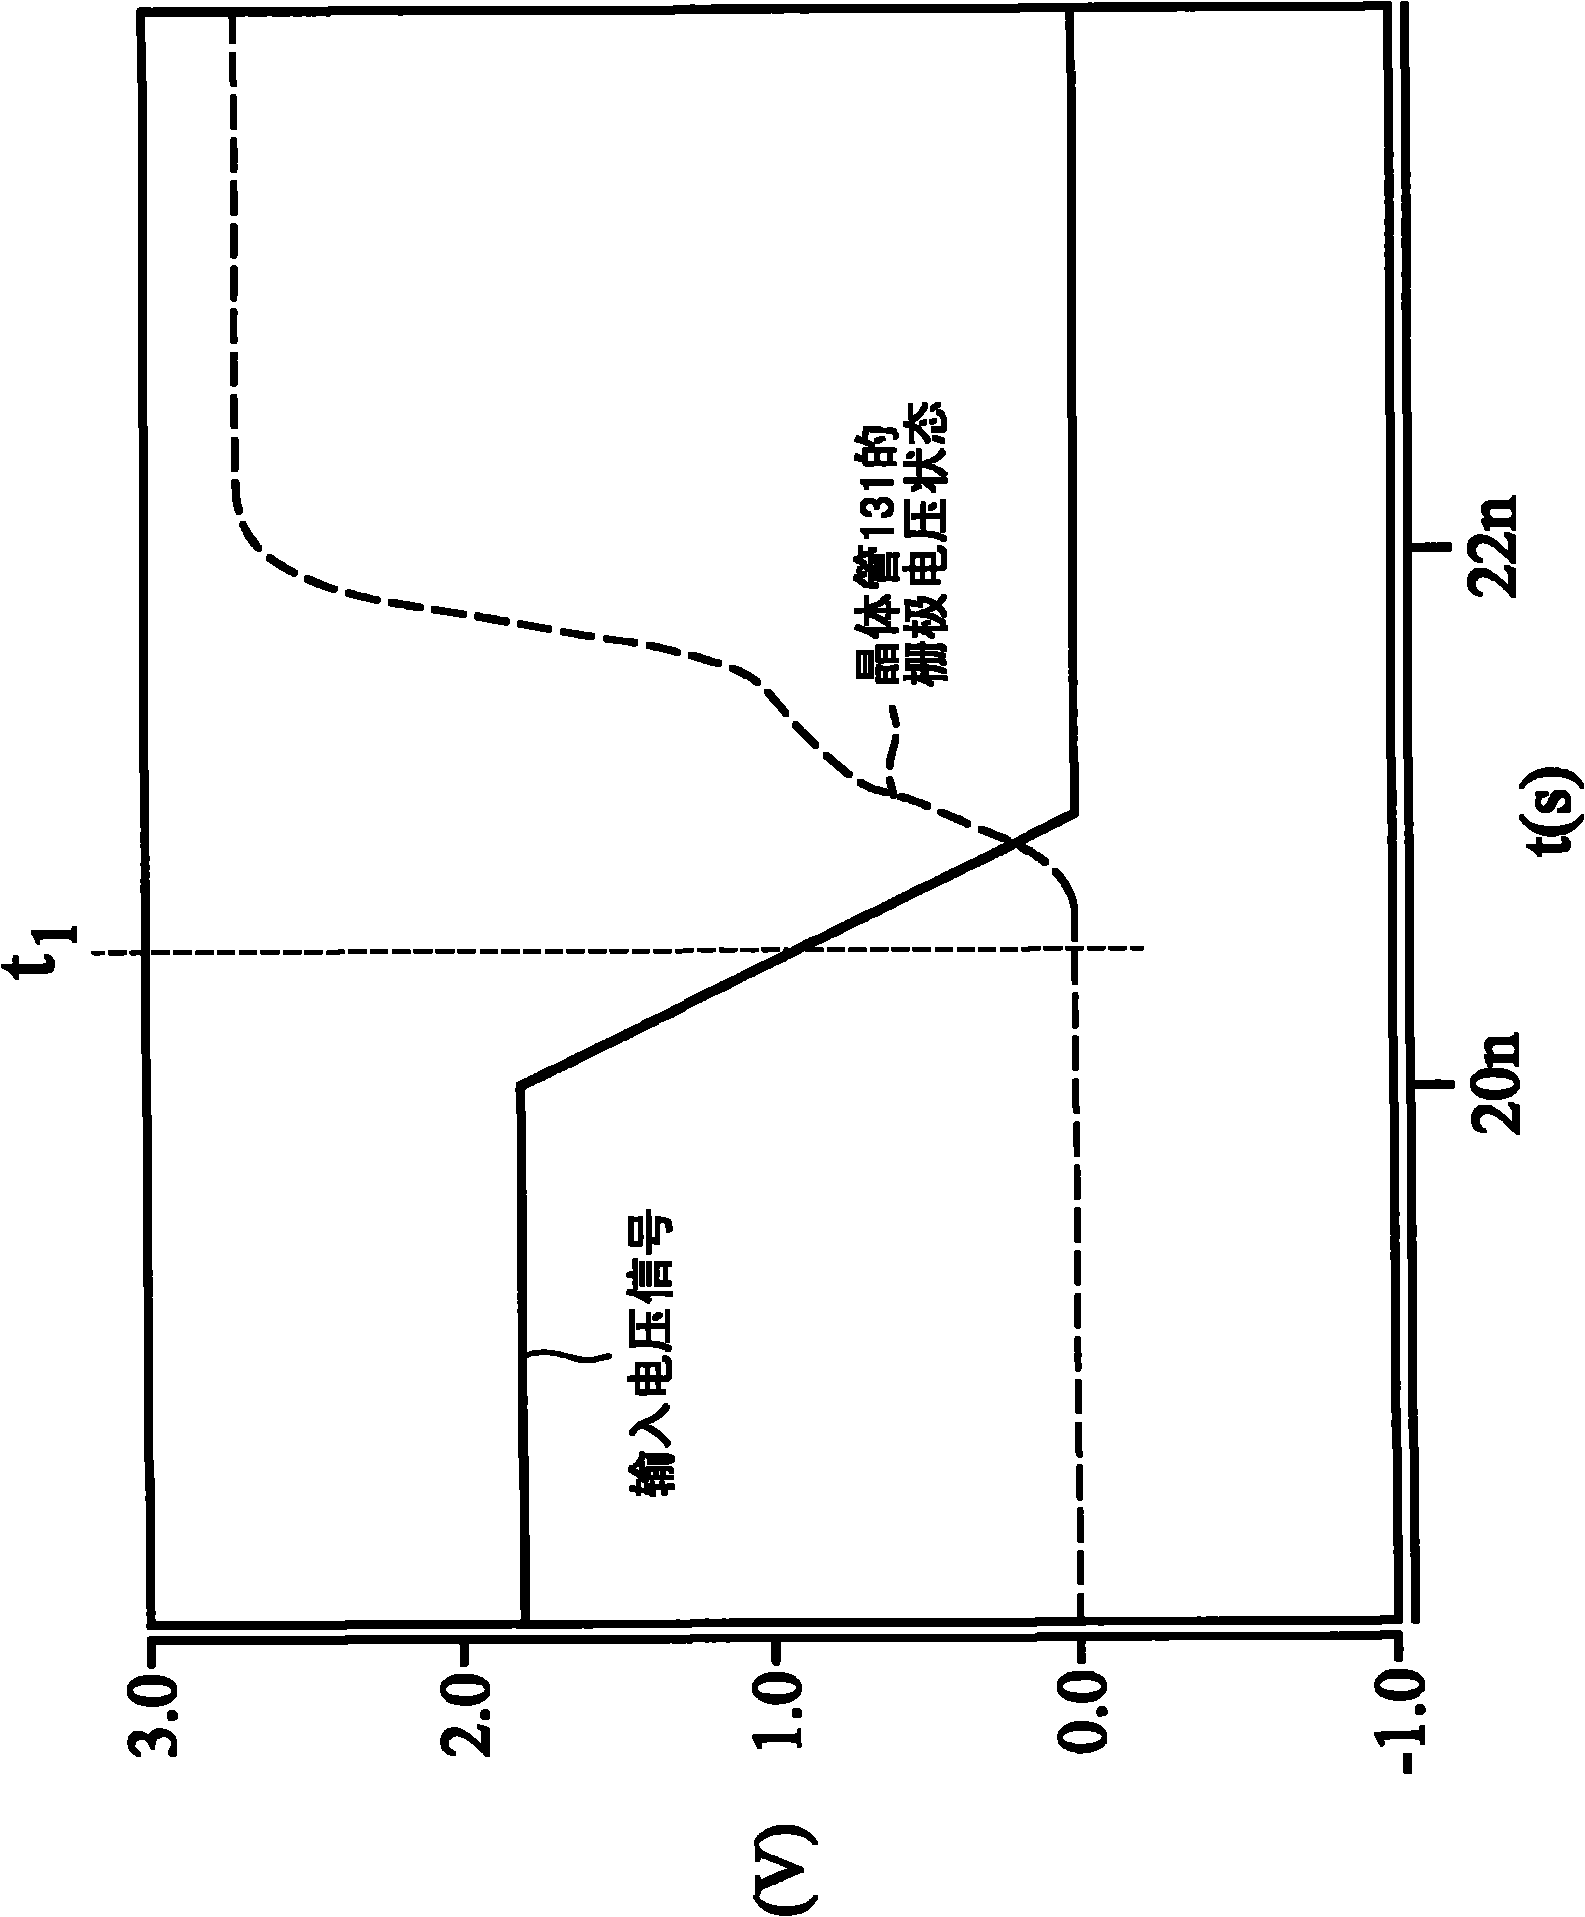 Level shifters, integrated circuits, systems, and method for operating the level shifters